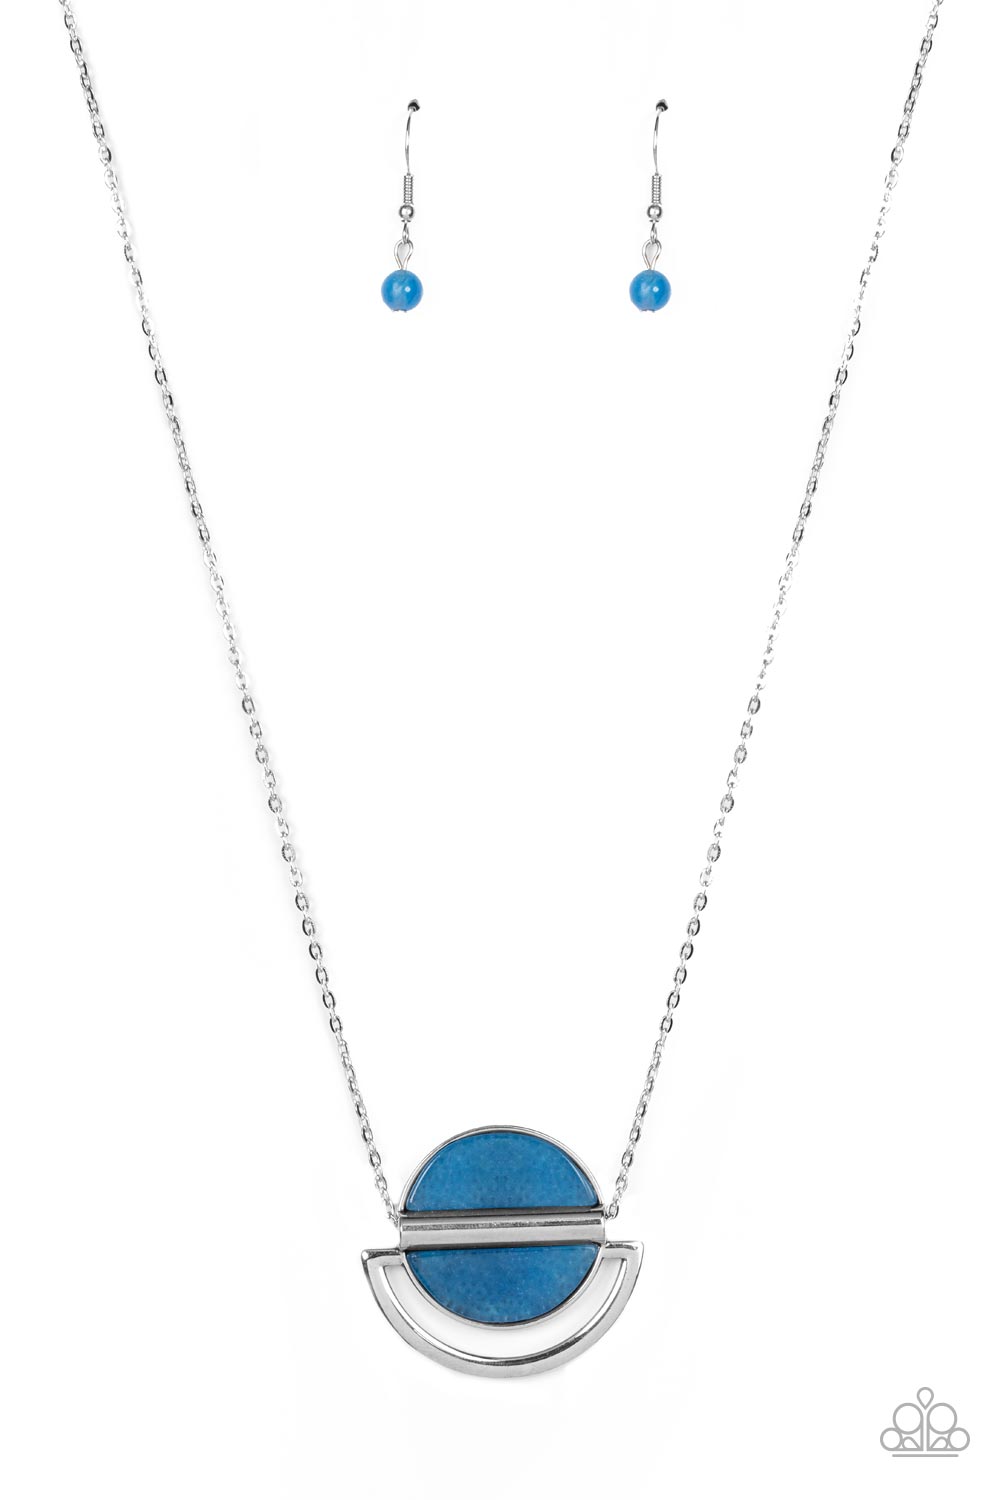 Ethereal Eclipse - blue - Paparazzi necklace